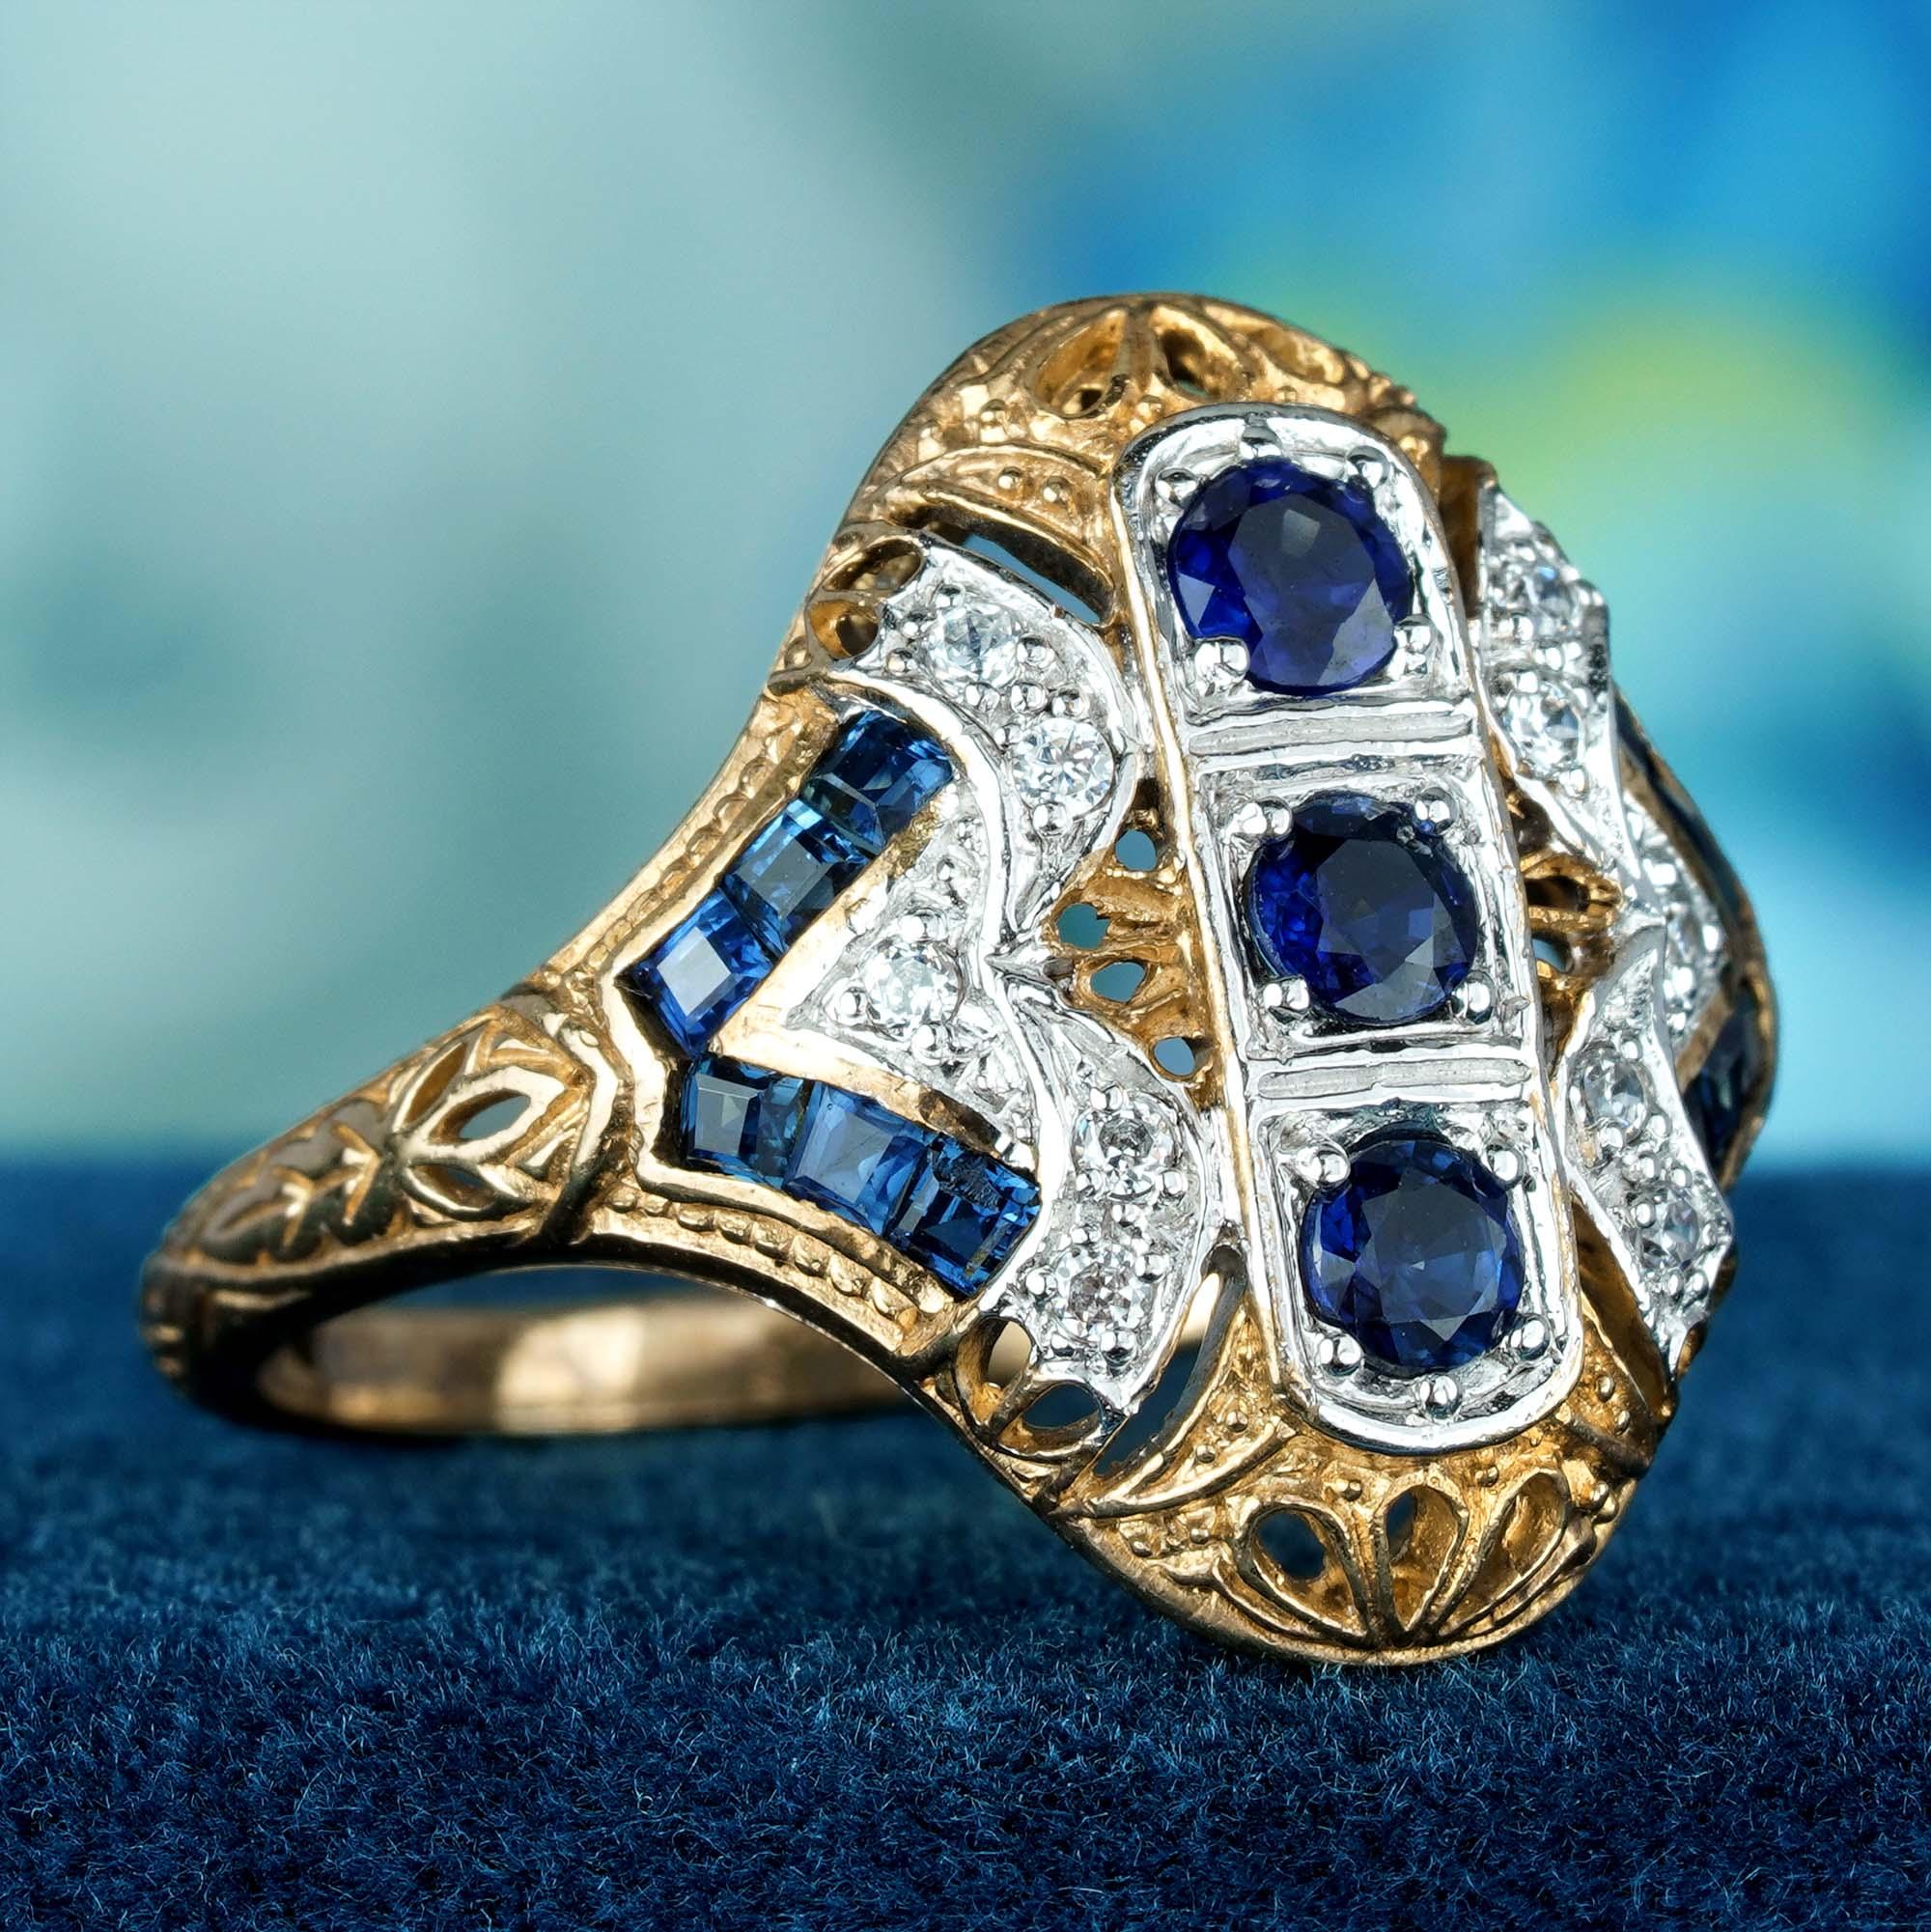 This Art Deco vintage-style ring. It features a central 3 cascading cluster of round blue sapphire set in a raised prong set, with delicate filigree work adorning the solid two tone gold adds a touch of romance to the ring. The sapphires are flanked